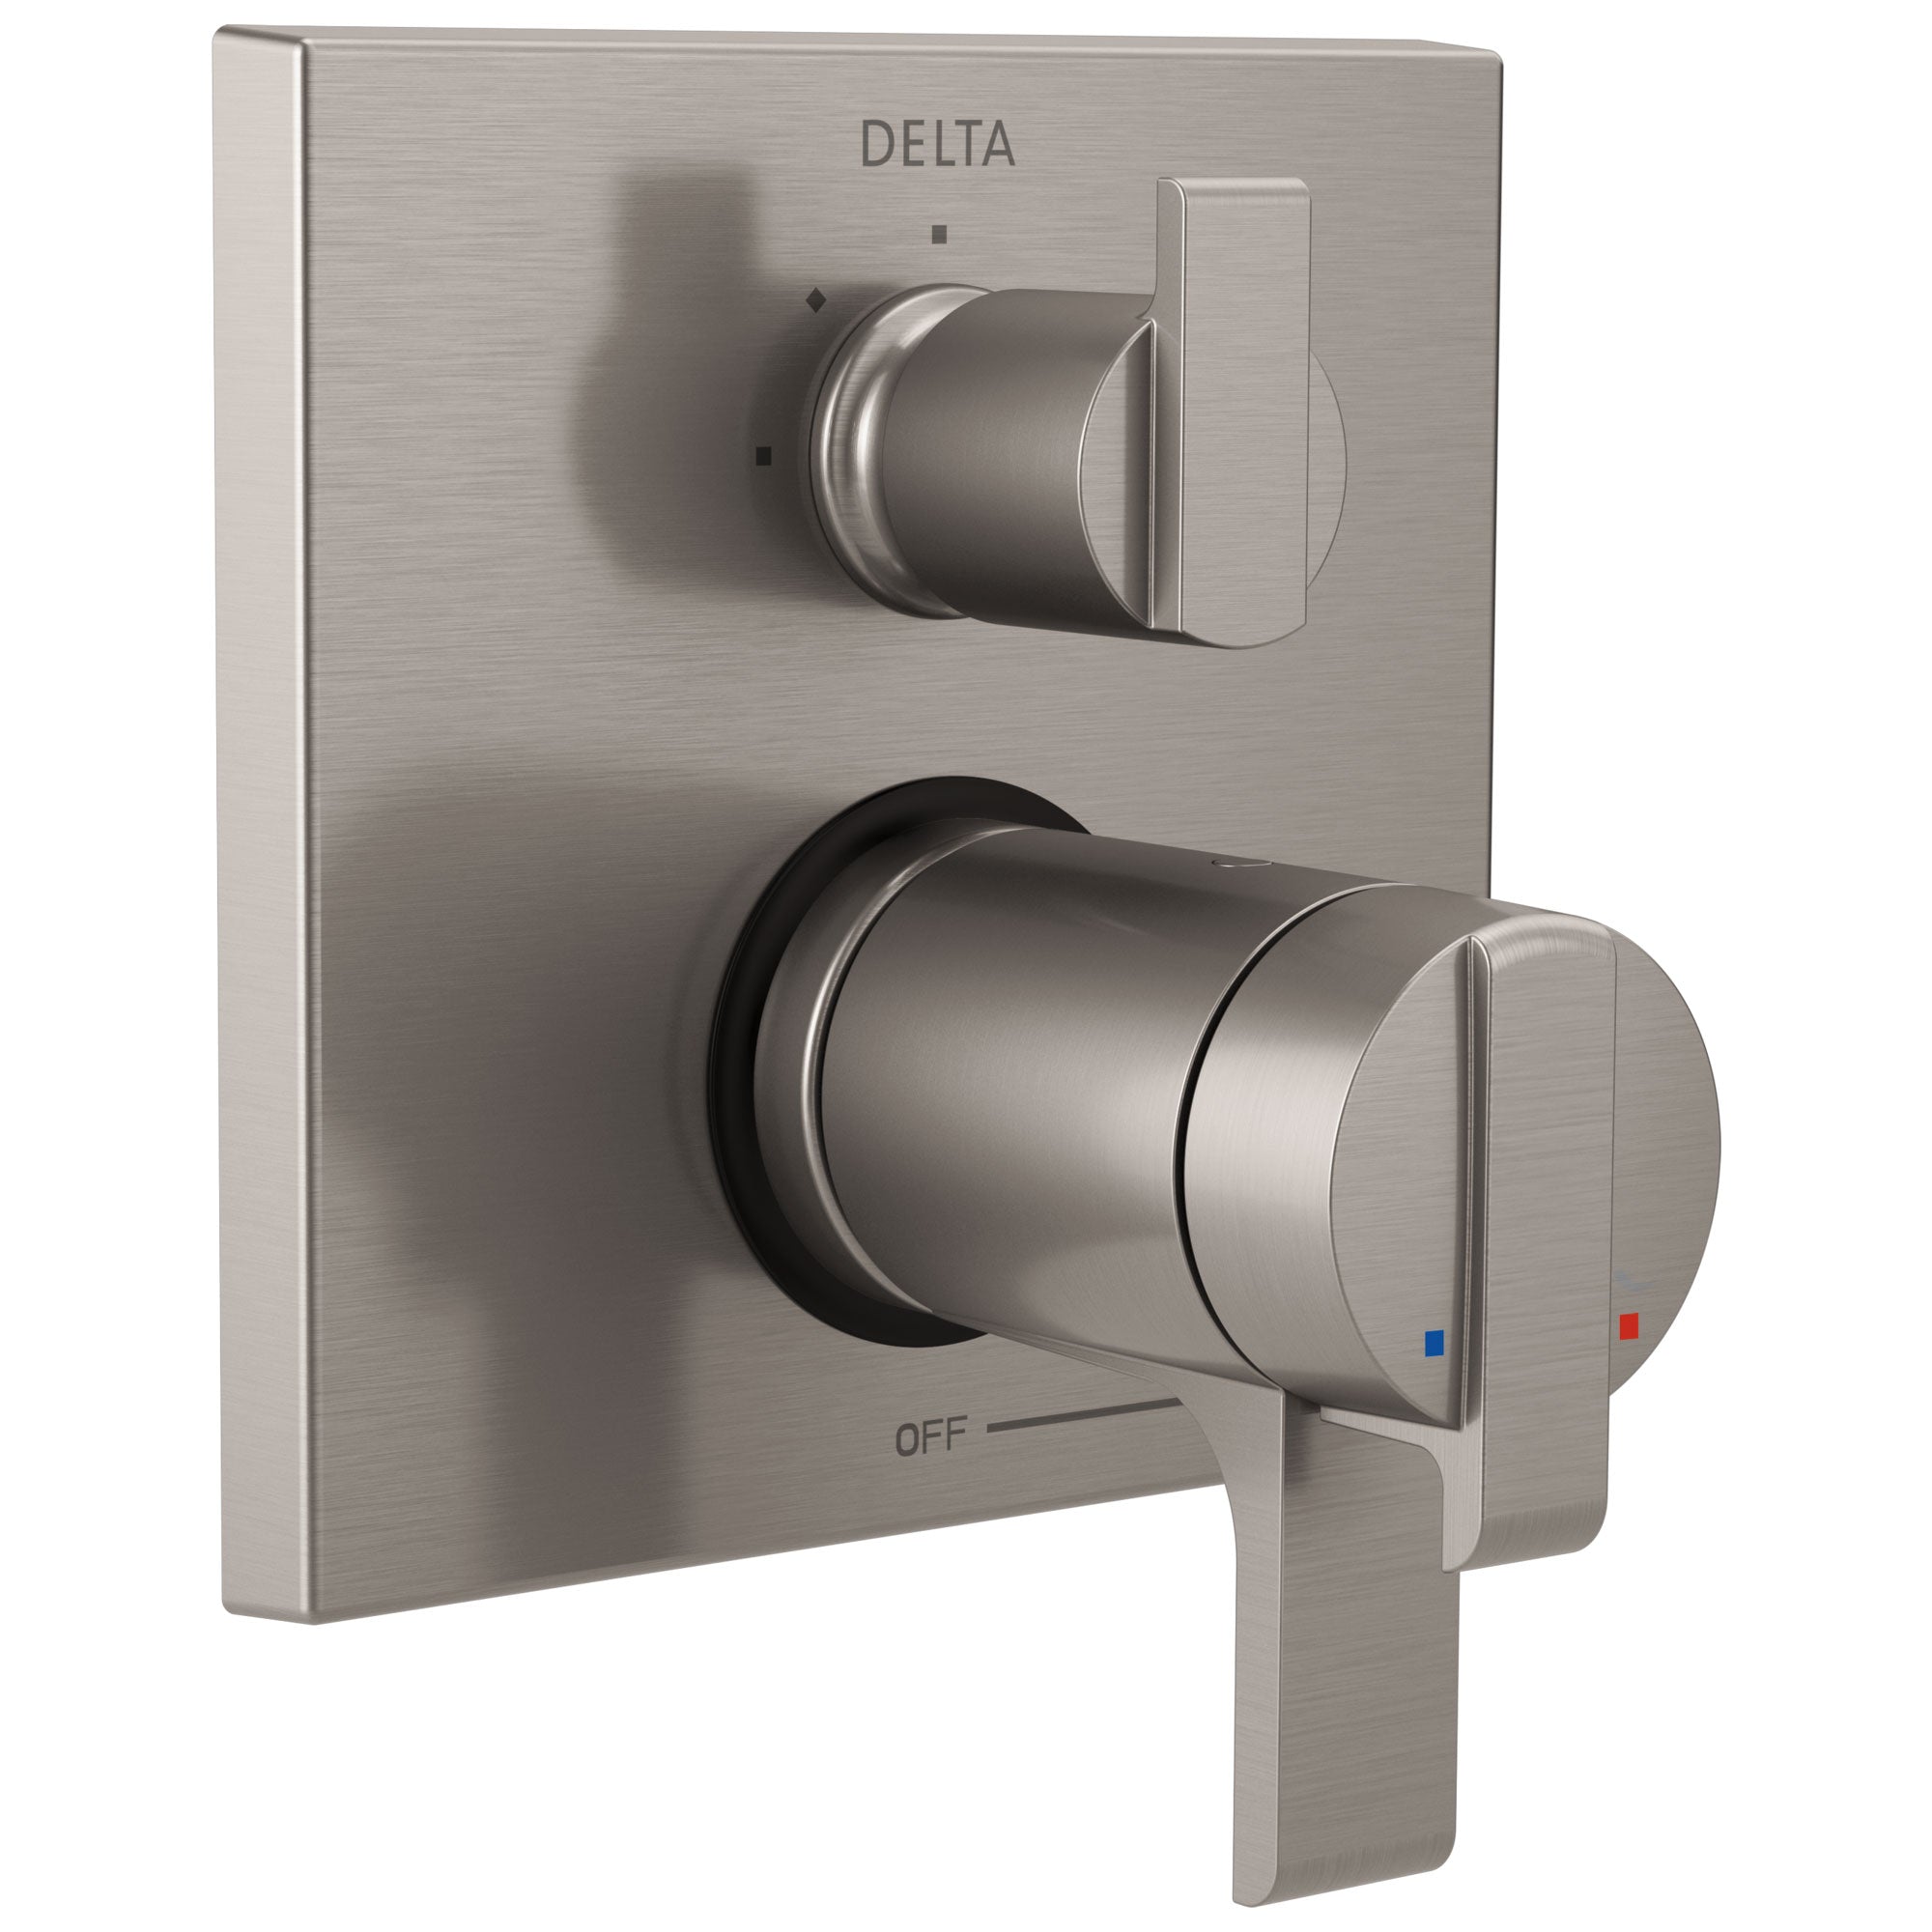 Delta Ara Collection Stainless Steel Finish Thermostatic Shower Faucet Control with 3-Setting Integrated Diverter Trim (Requires Valve) DT27T867SS